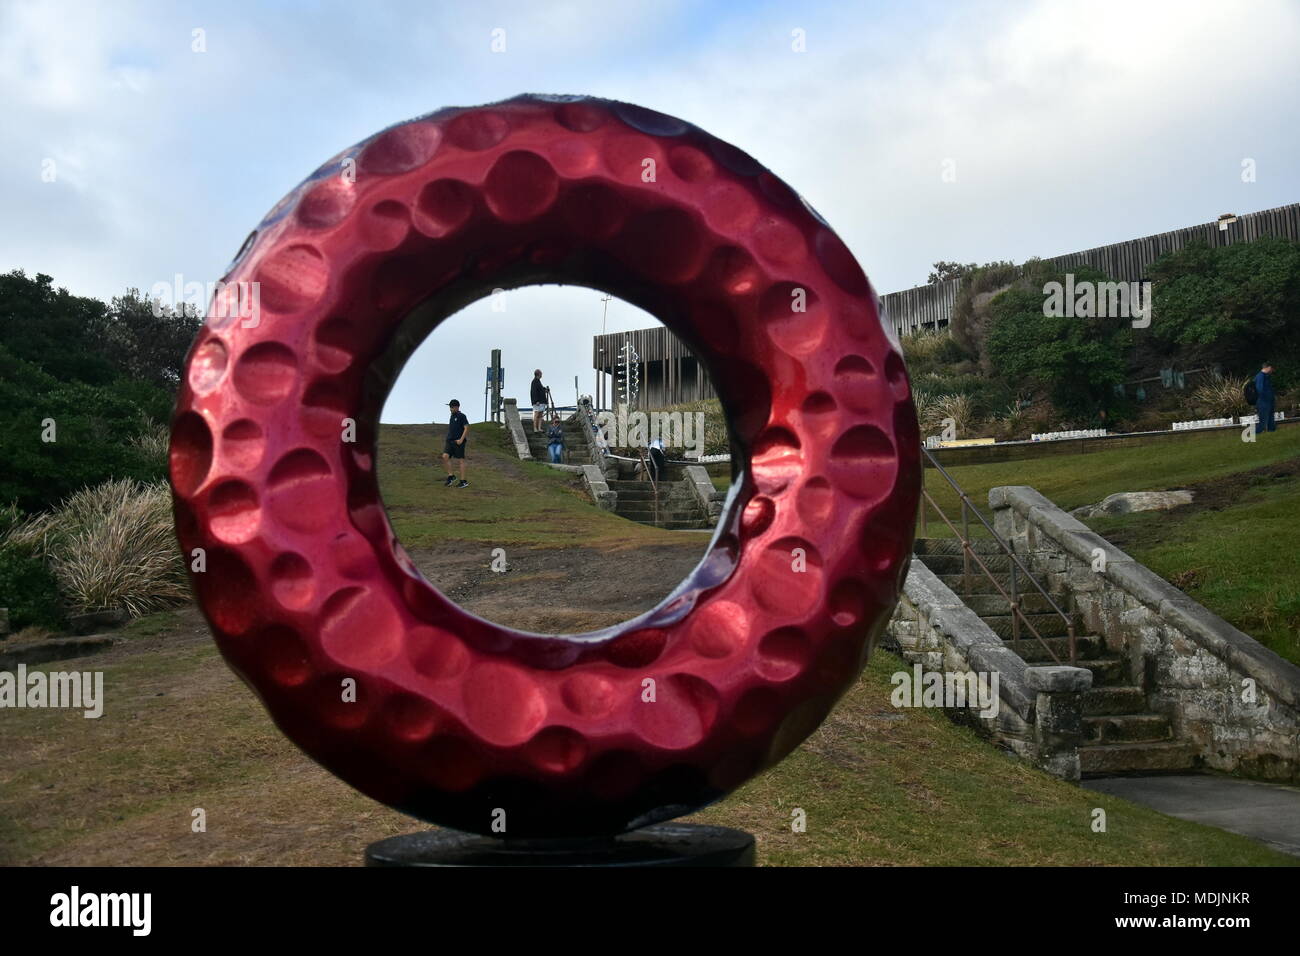 Sydney, Australia - Oct 27, 2017. Wesley Harrop: Zygomaticus. Sculpture by the Sea along the Bondi to Coogee coastal walk is the world's largest free  Stock Photo